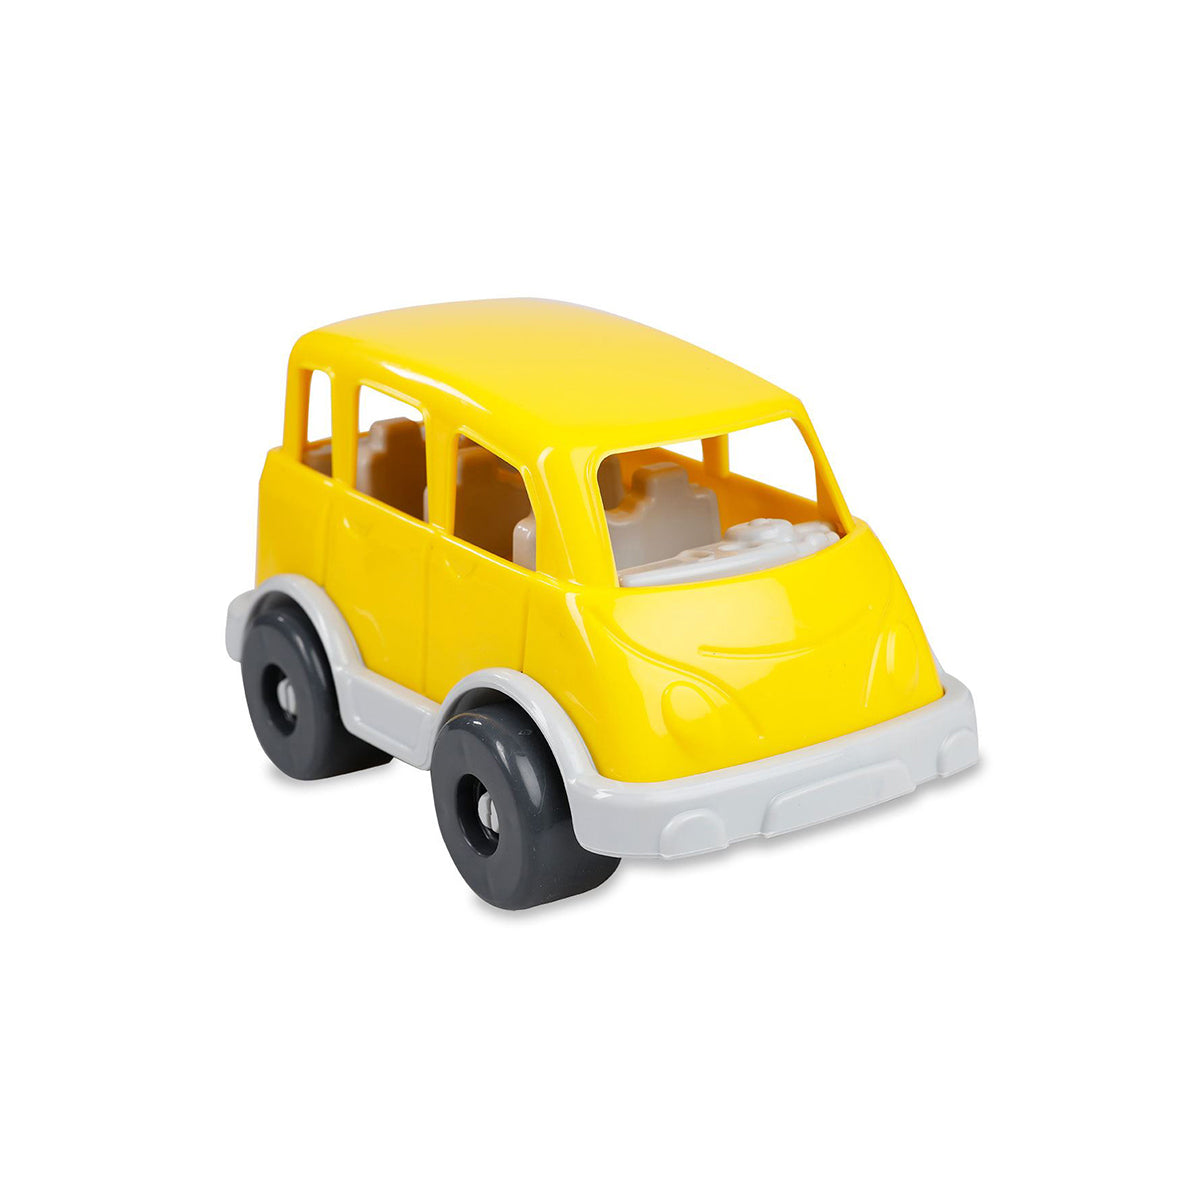 Dolu - My First Car (Styles Vary - One Supplied)